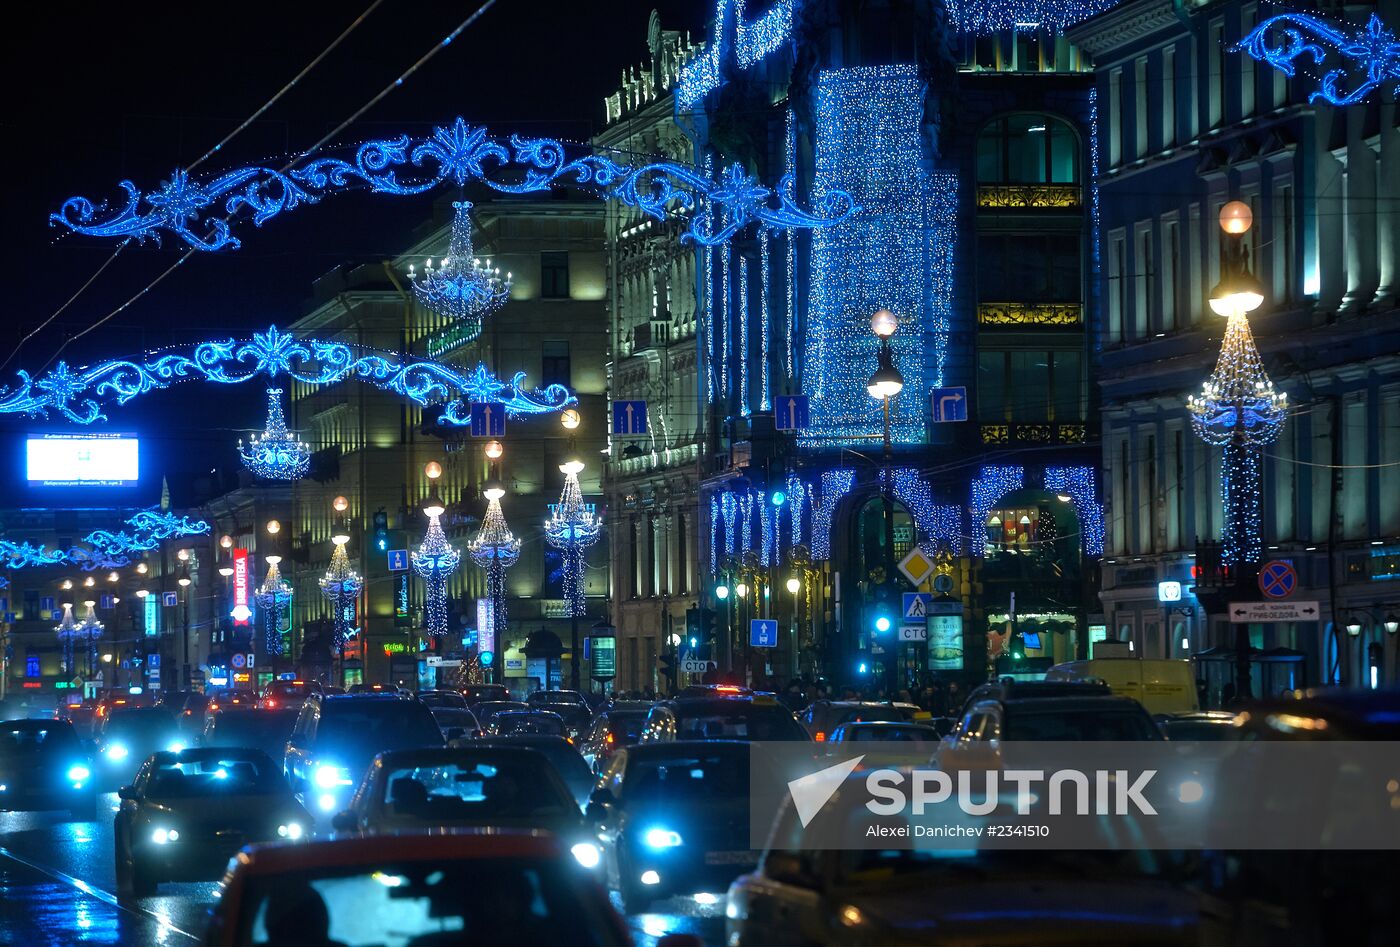 Festive decorations for New Year's in downtown St. Petersburg